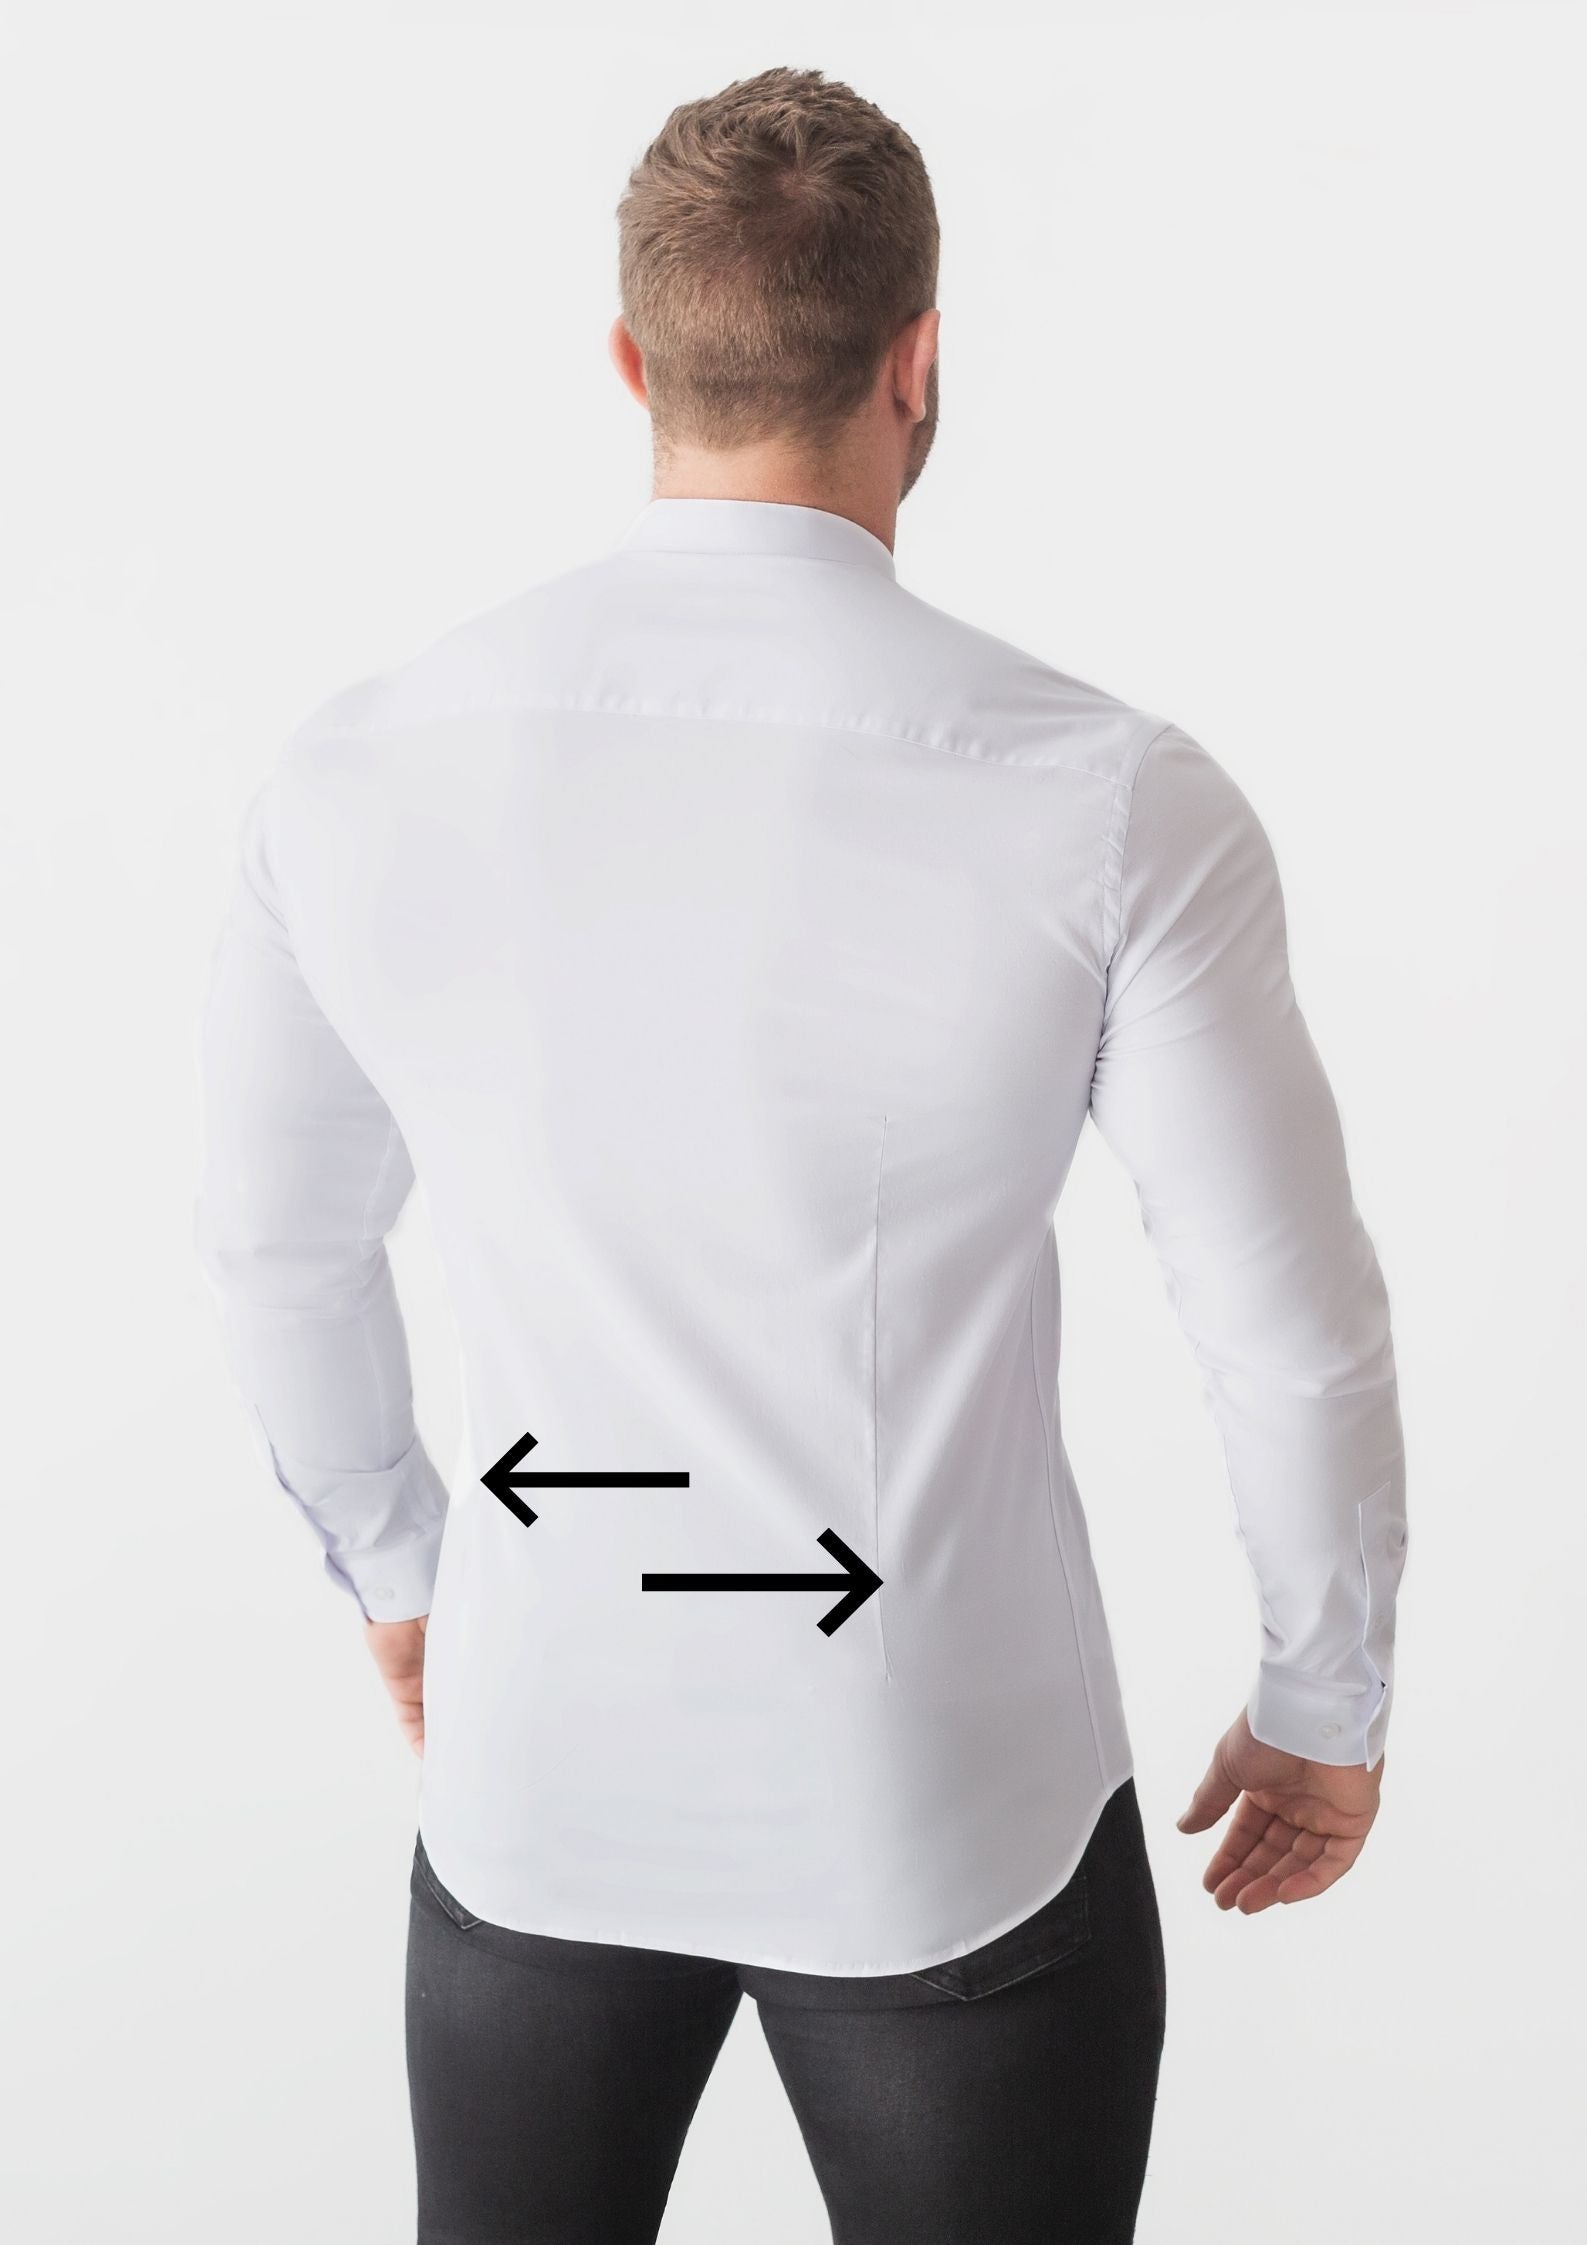 So Much To Make: How To Alter a Man's Shirt to a Woman's Shape